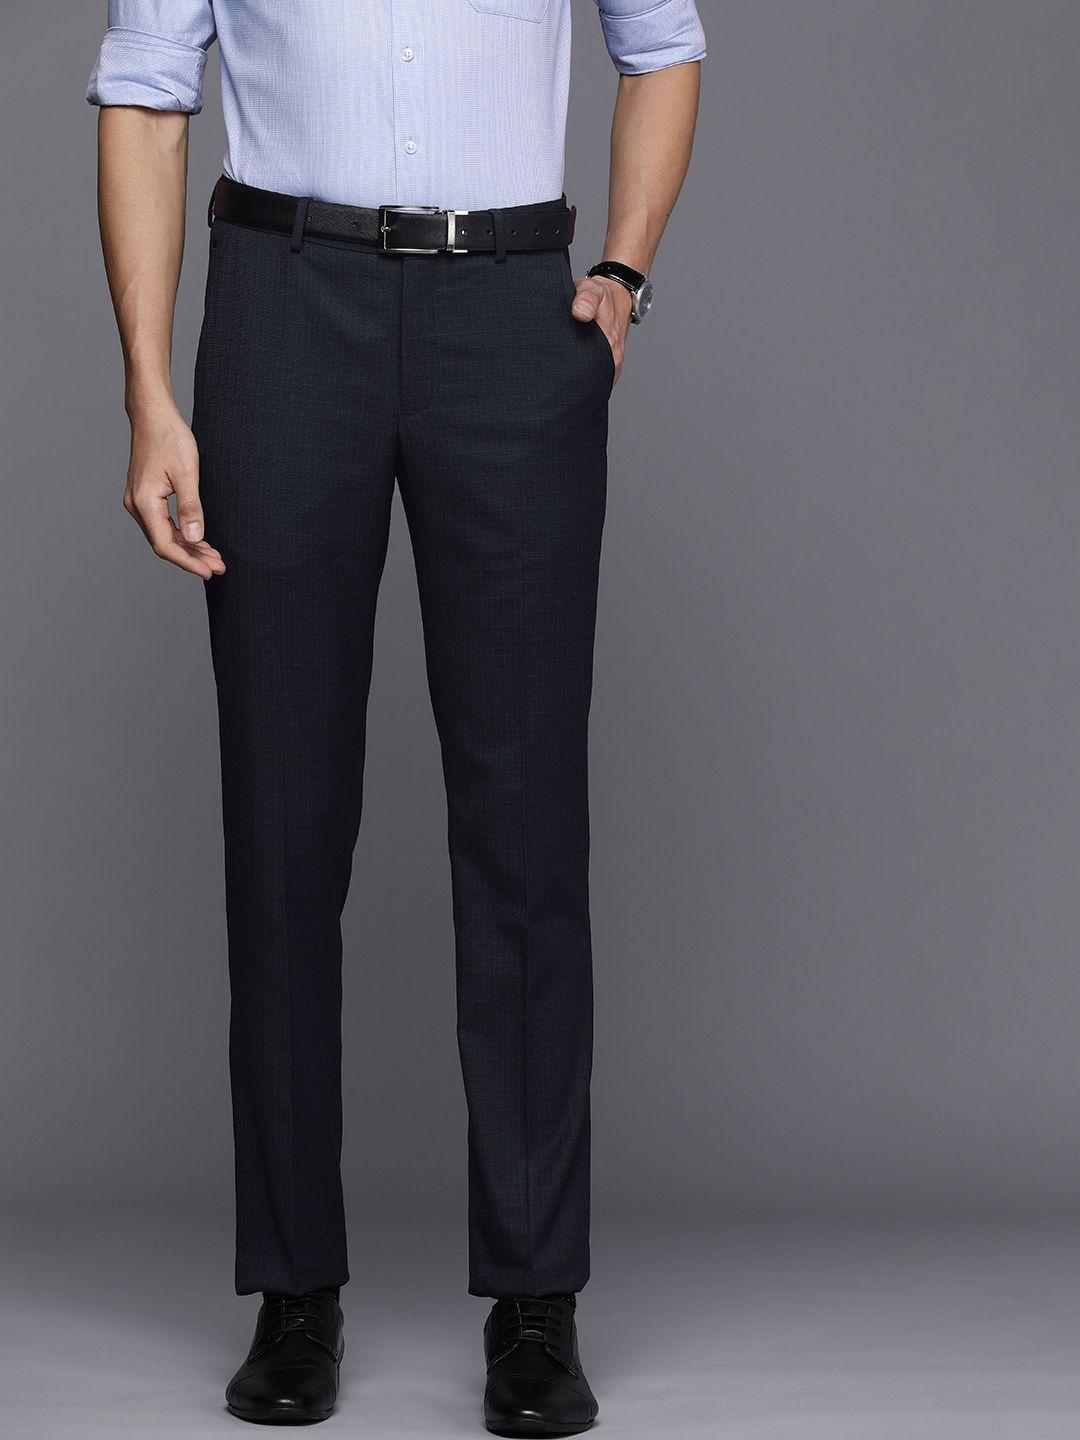 louis-philippe-men-navy-blue-checked-slim-fit-trousers